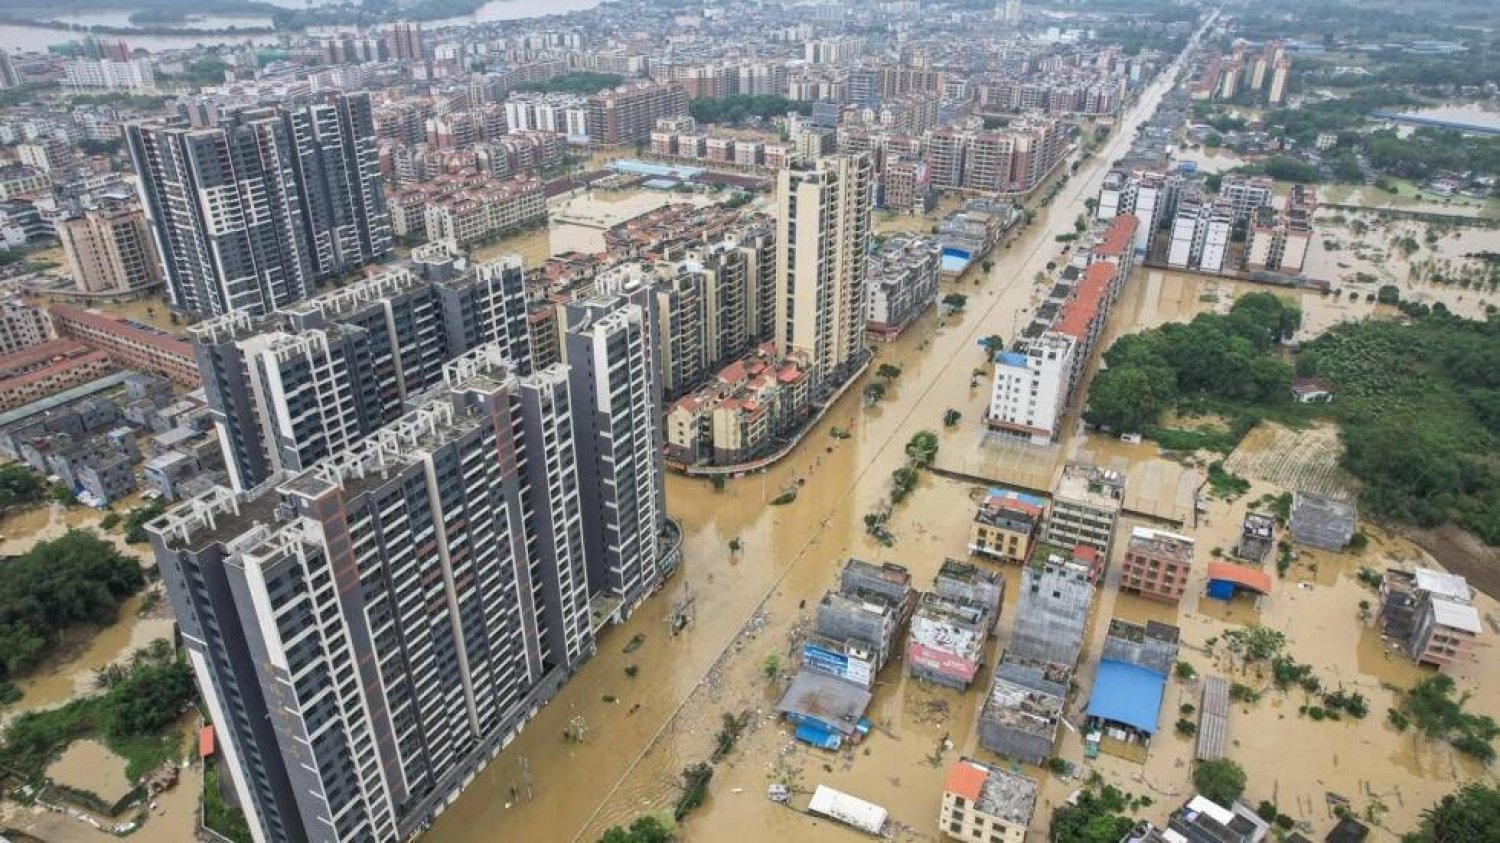 Hundreds of thousands of people have been evacuated due to flooding in southern China, including in Qingyuan (pictured). STR, STR / CNS/AFP